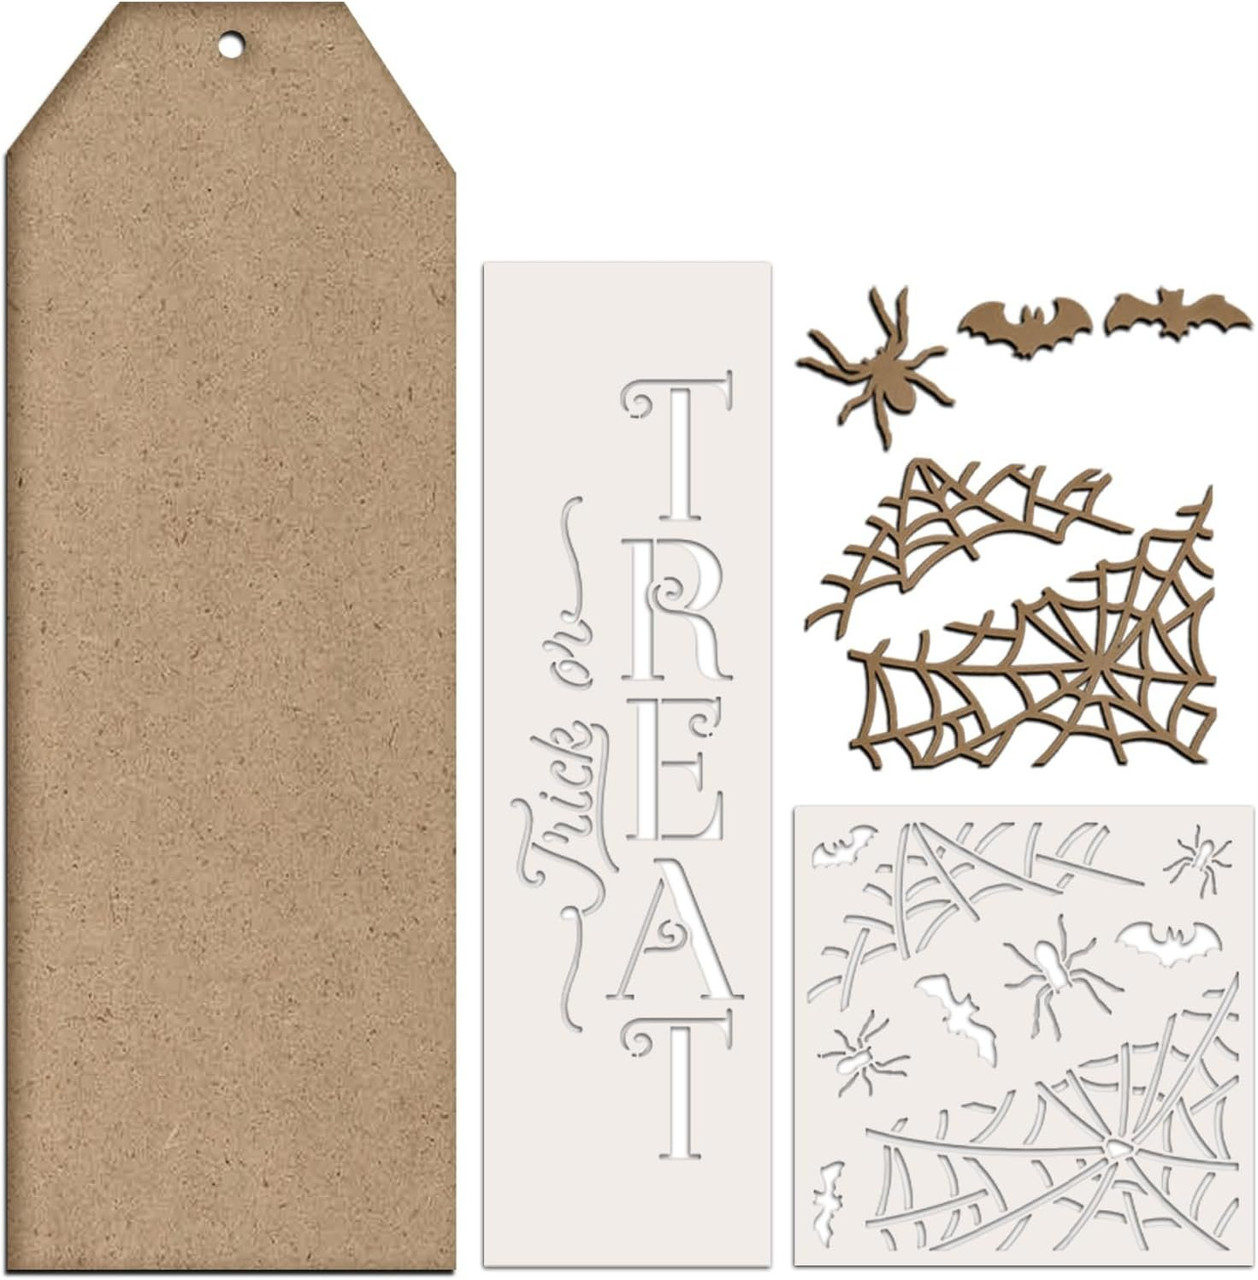 Trick or Treat Tag Sign Project Set by StudioR12 - USA Made - DIY Spider Web and Bat Halloween Home Decor - Surface & Stencil Kit - CMBN713